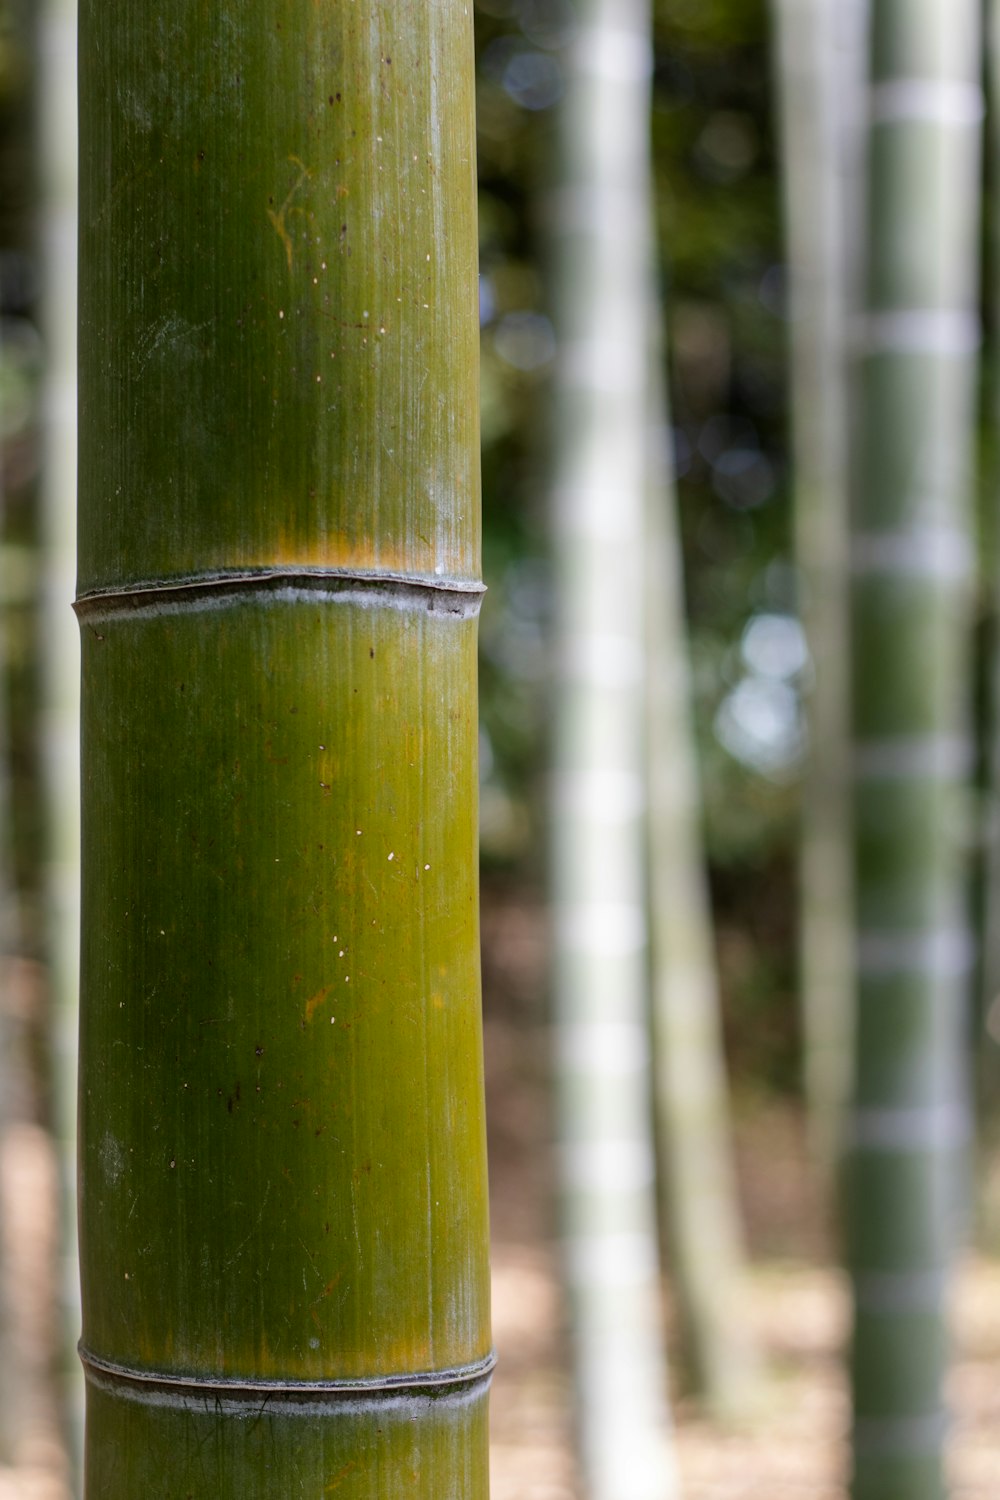 a tall green bamboo tree in a forest